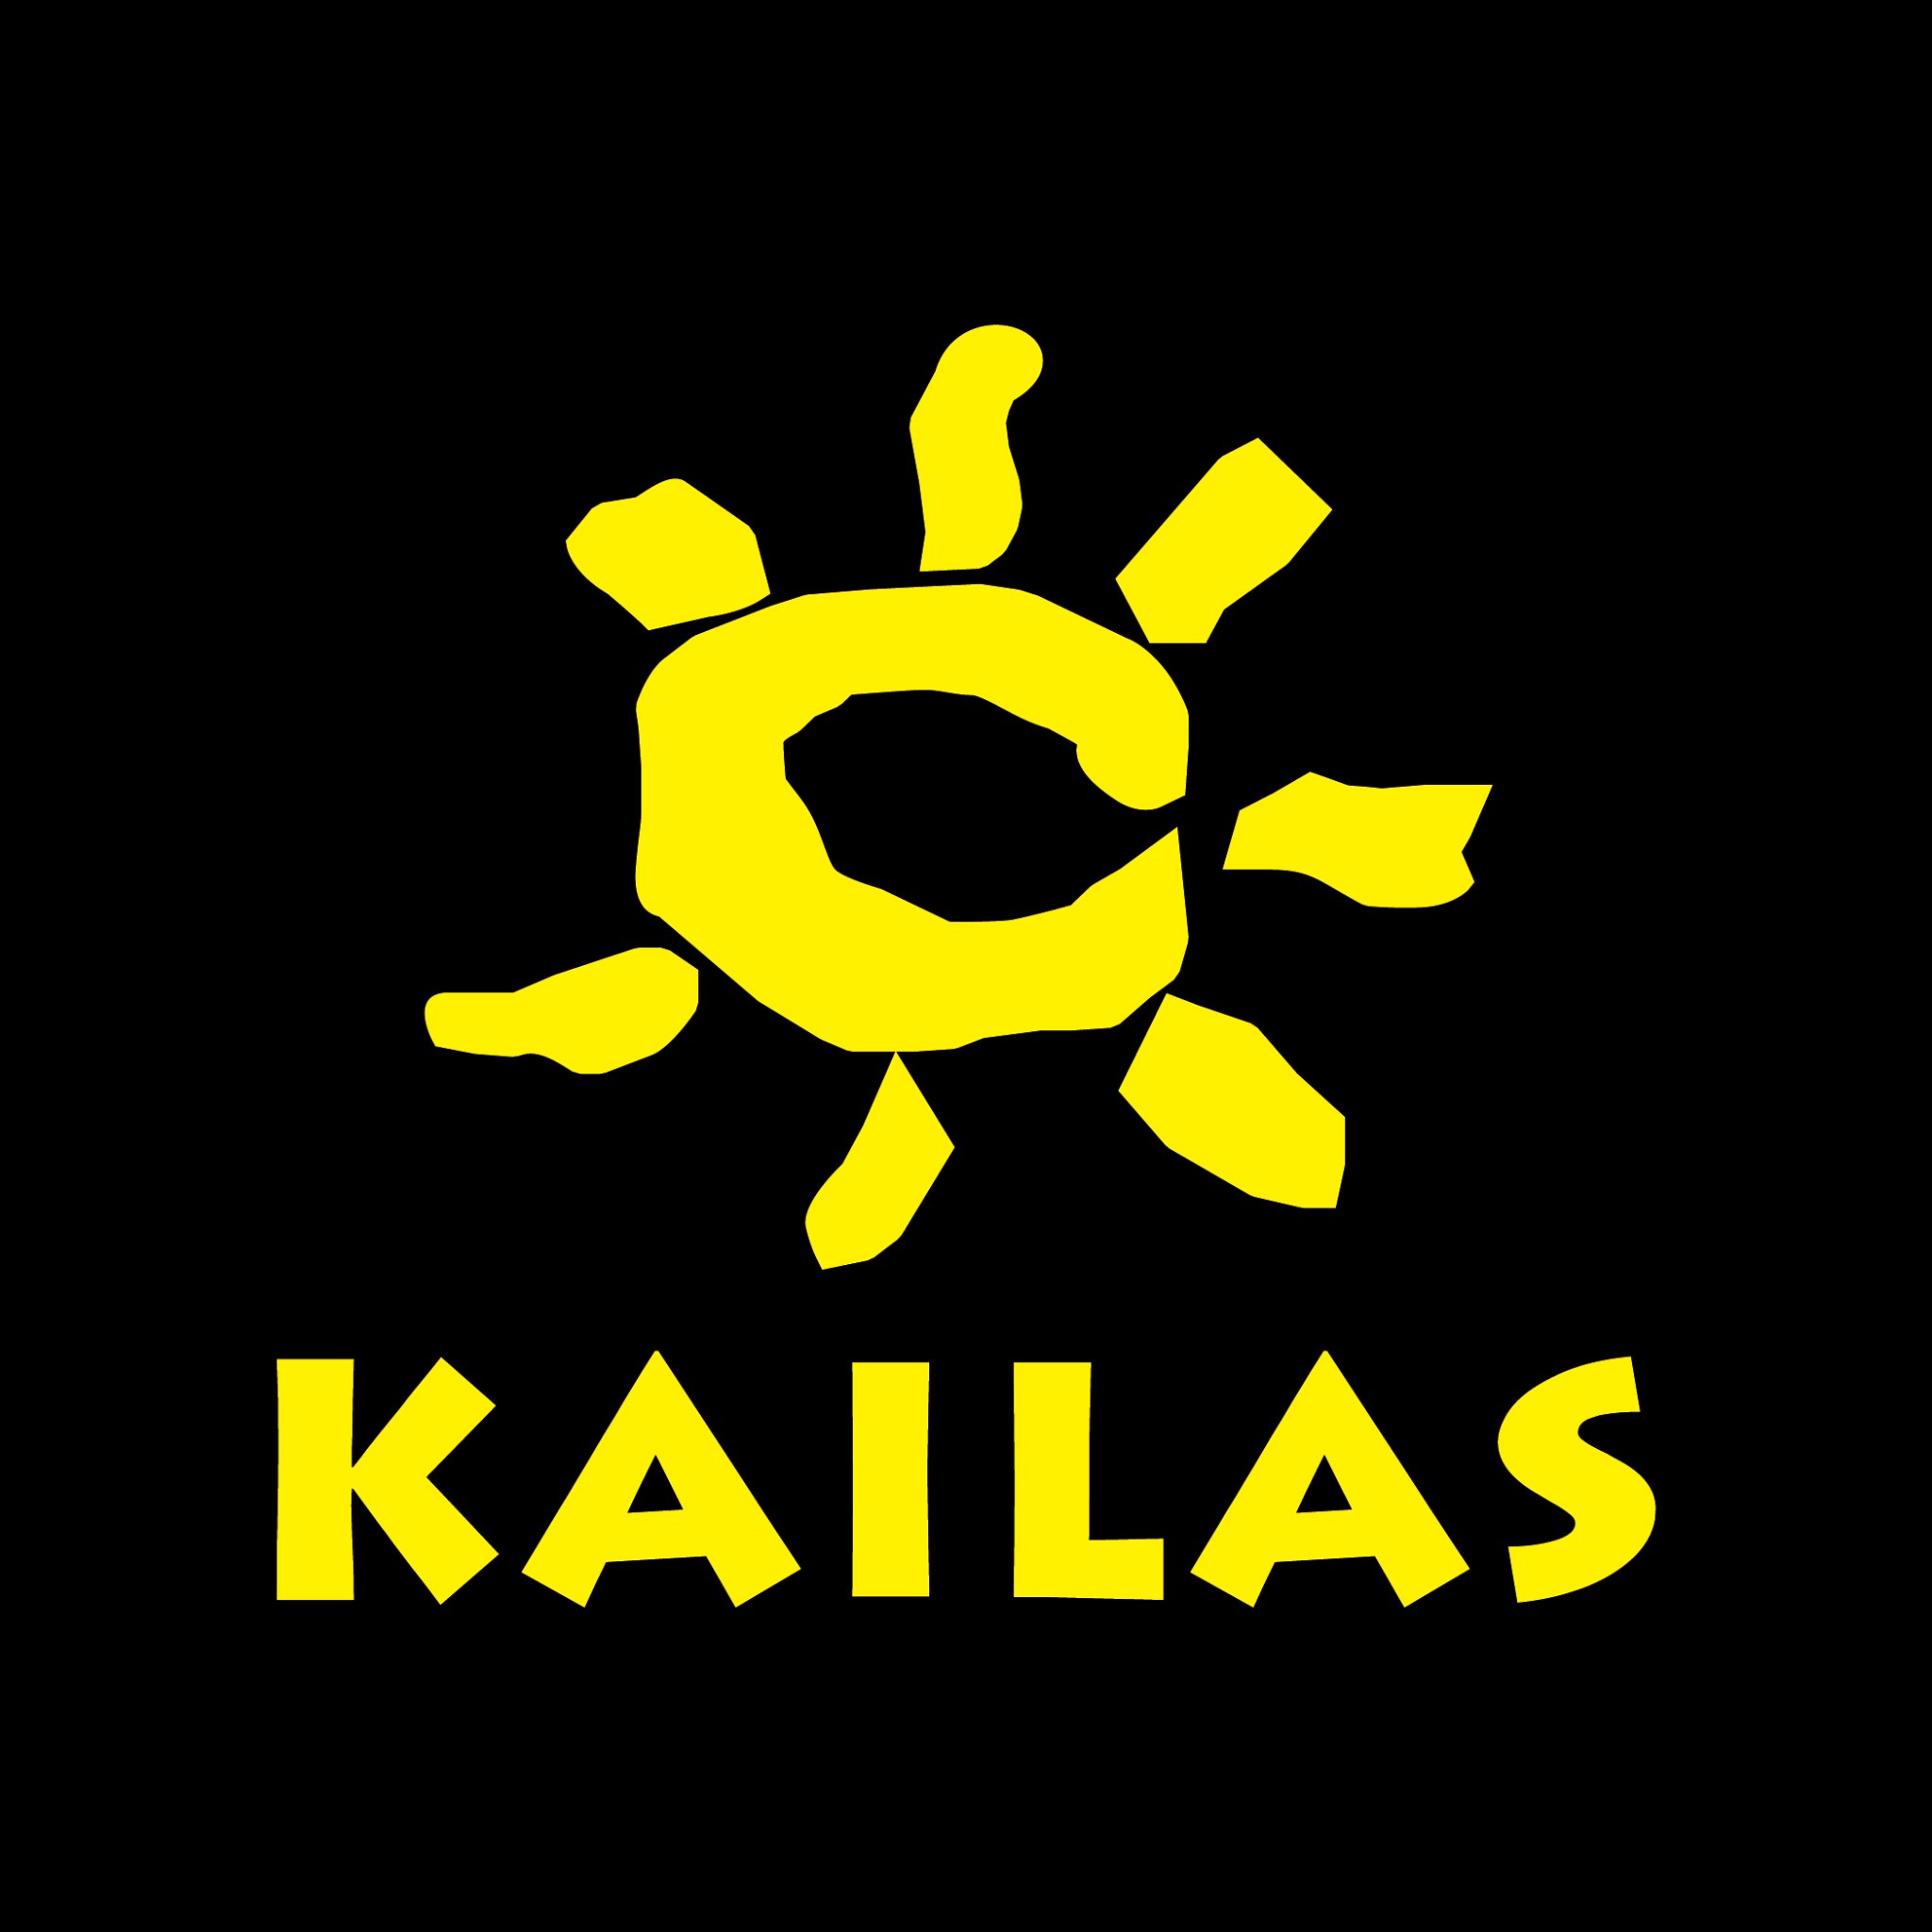 KAILAS are rock-solid in promoting climbing and mountaineering worldwide, creating a better future for people in the great outdoors.